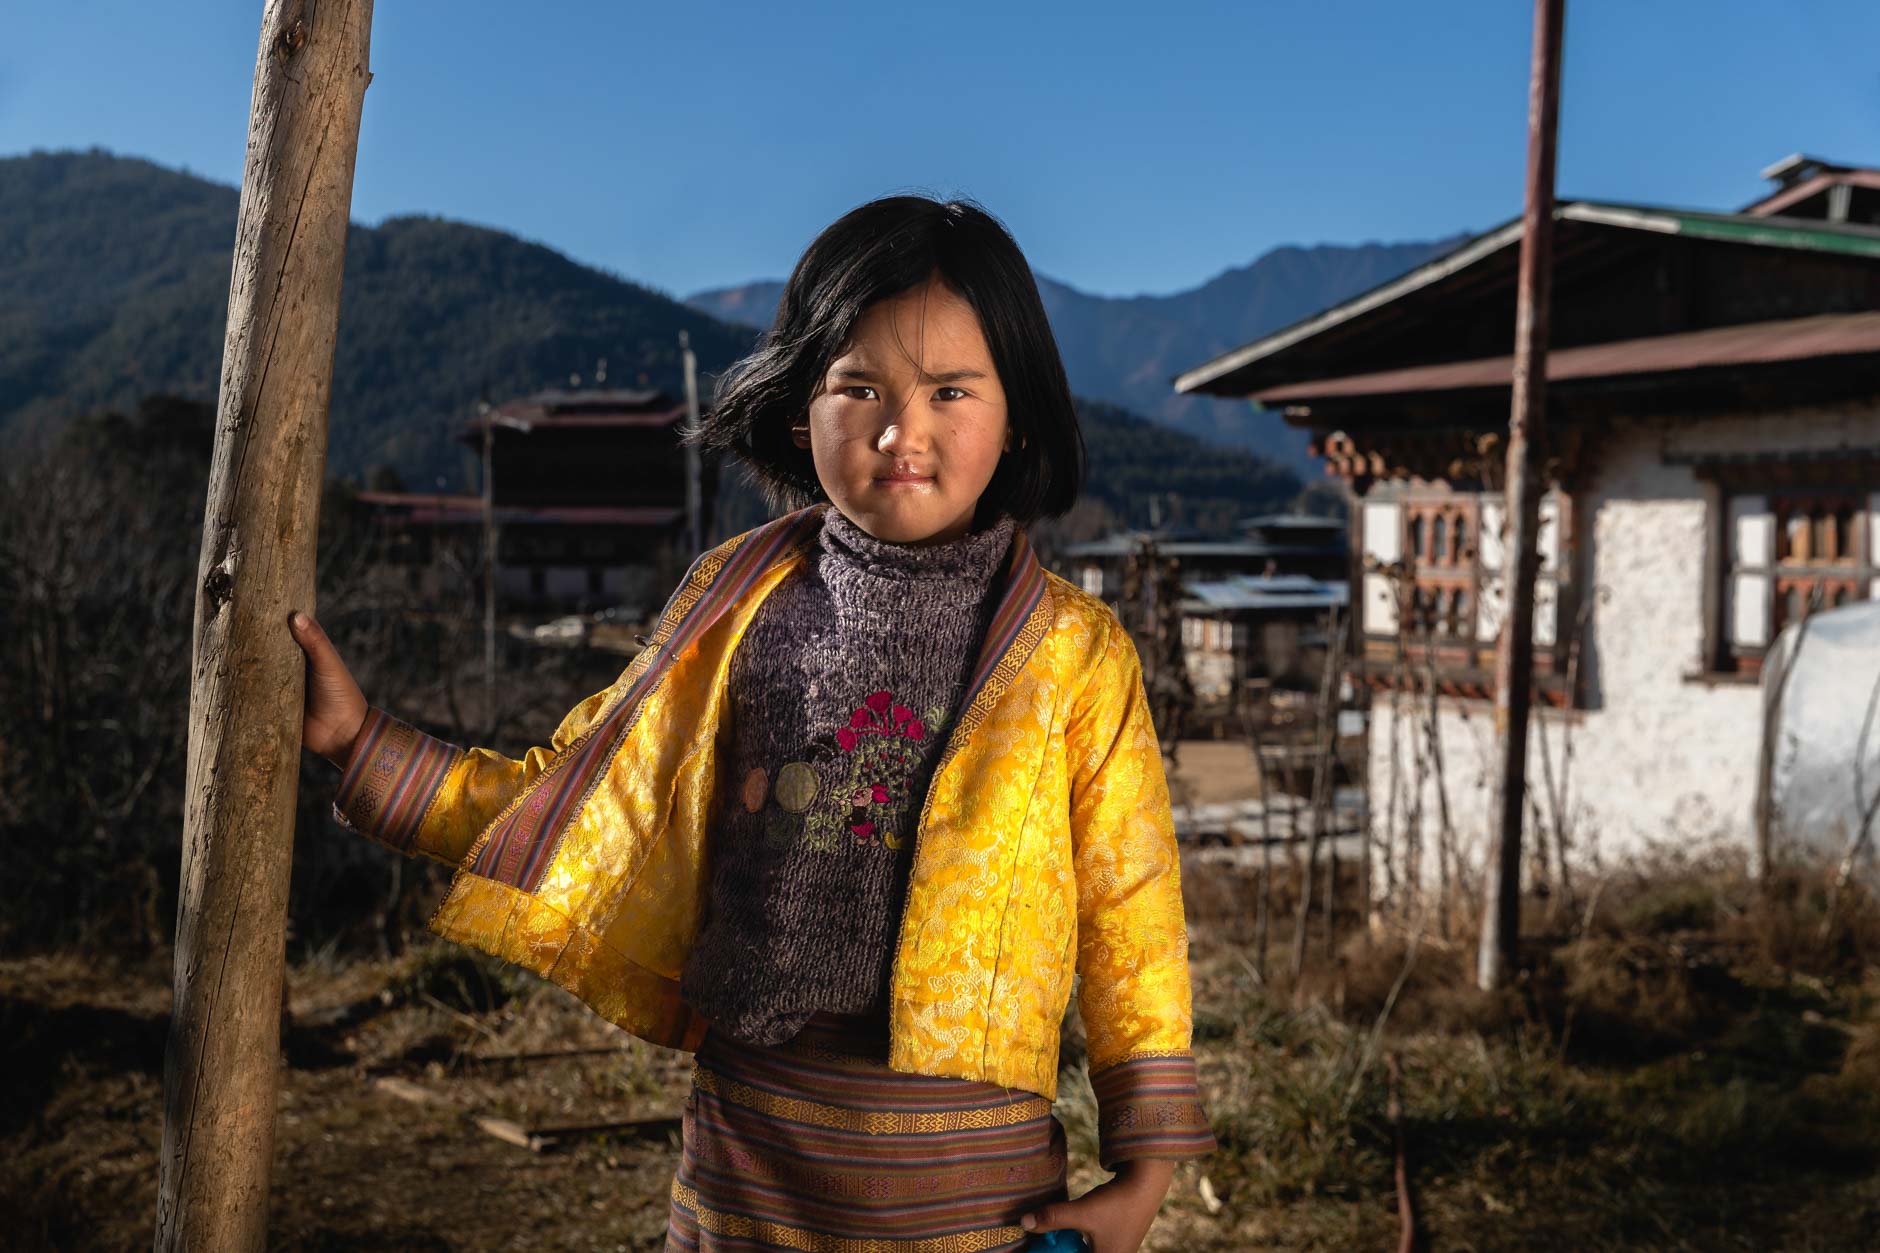 Portrait photography of a young girl wearing a yellow jacket in Bhutan